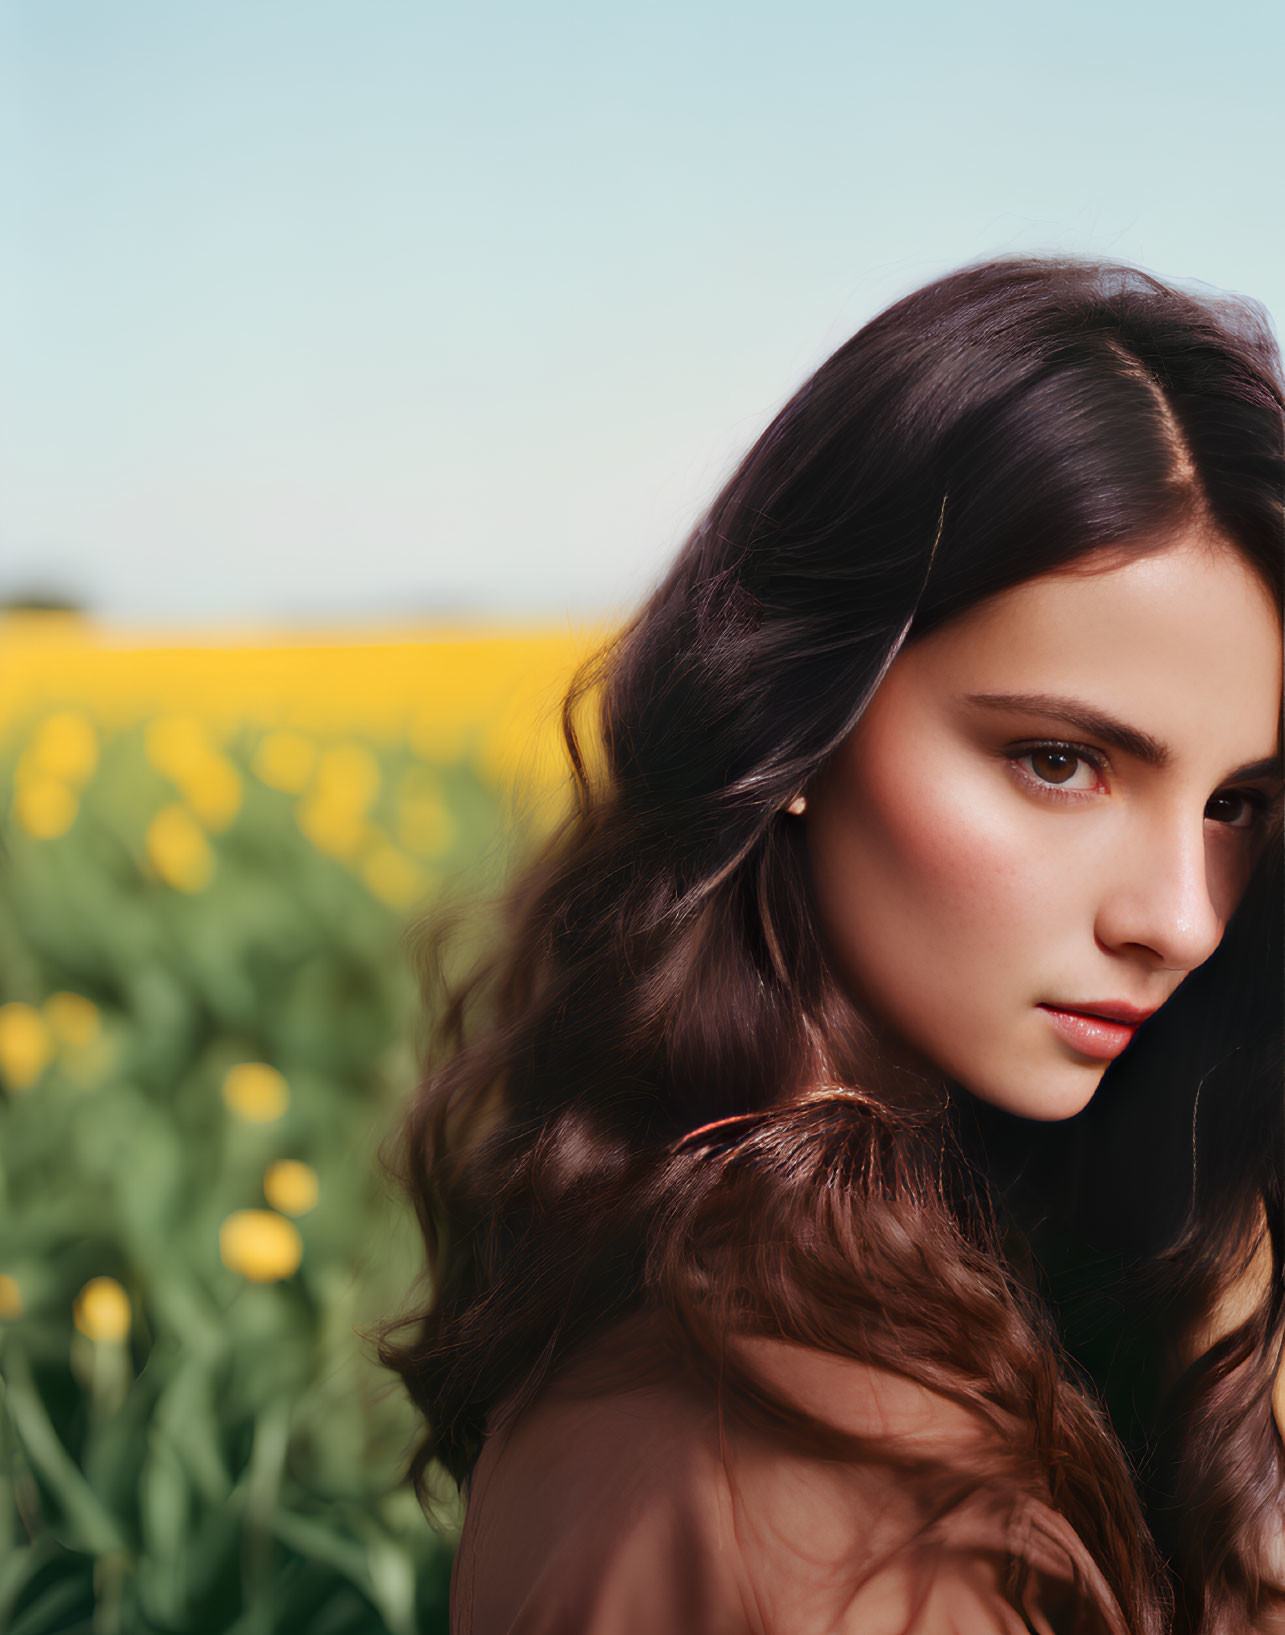 Brown-haired woman in yellow flower field gazing back peacefully